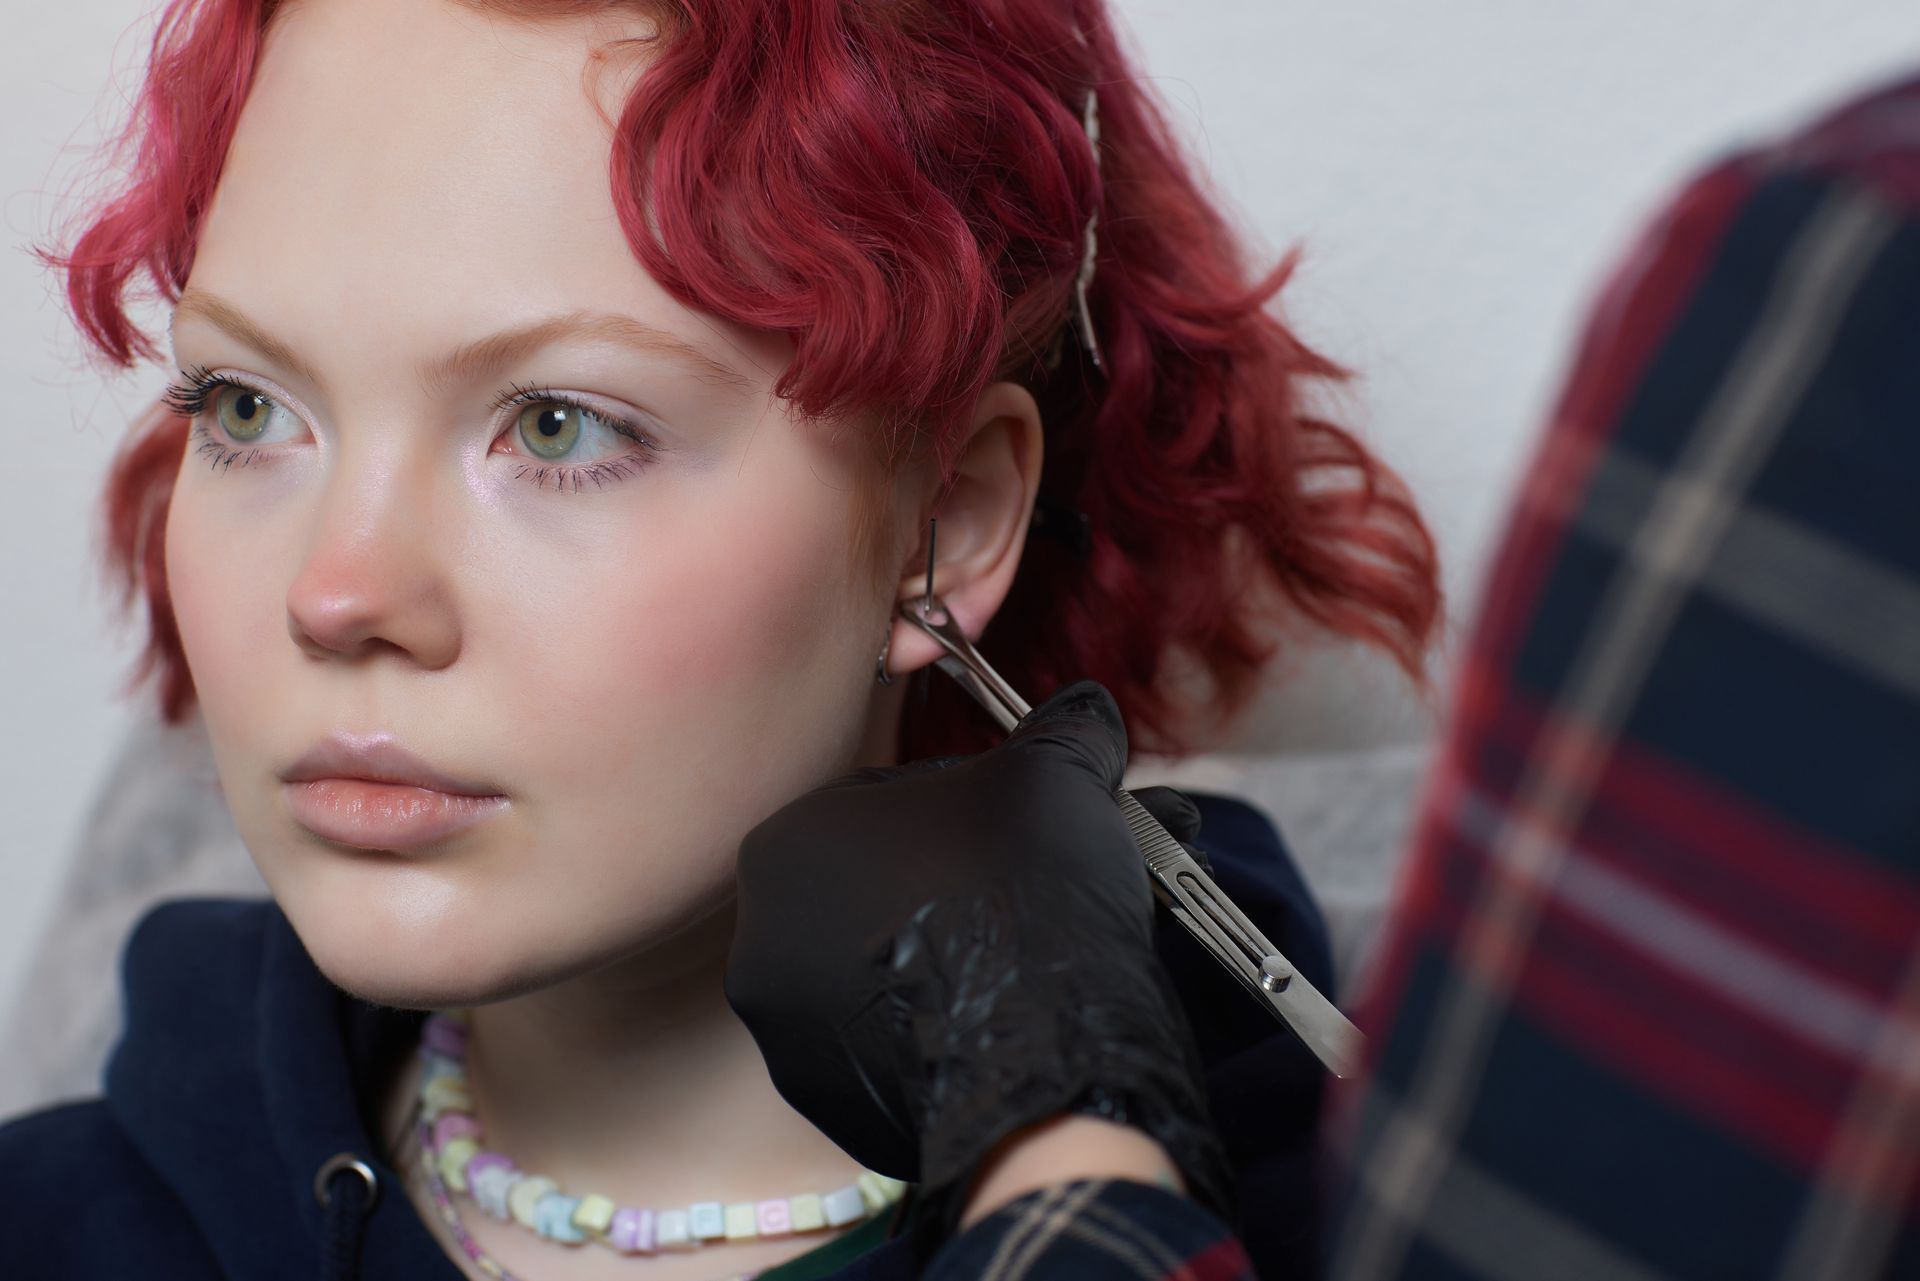 a woman with red hair is getting her ear pierced